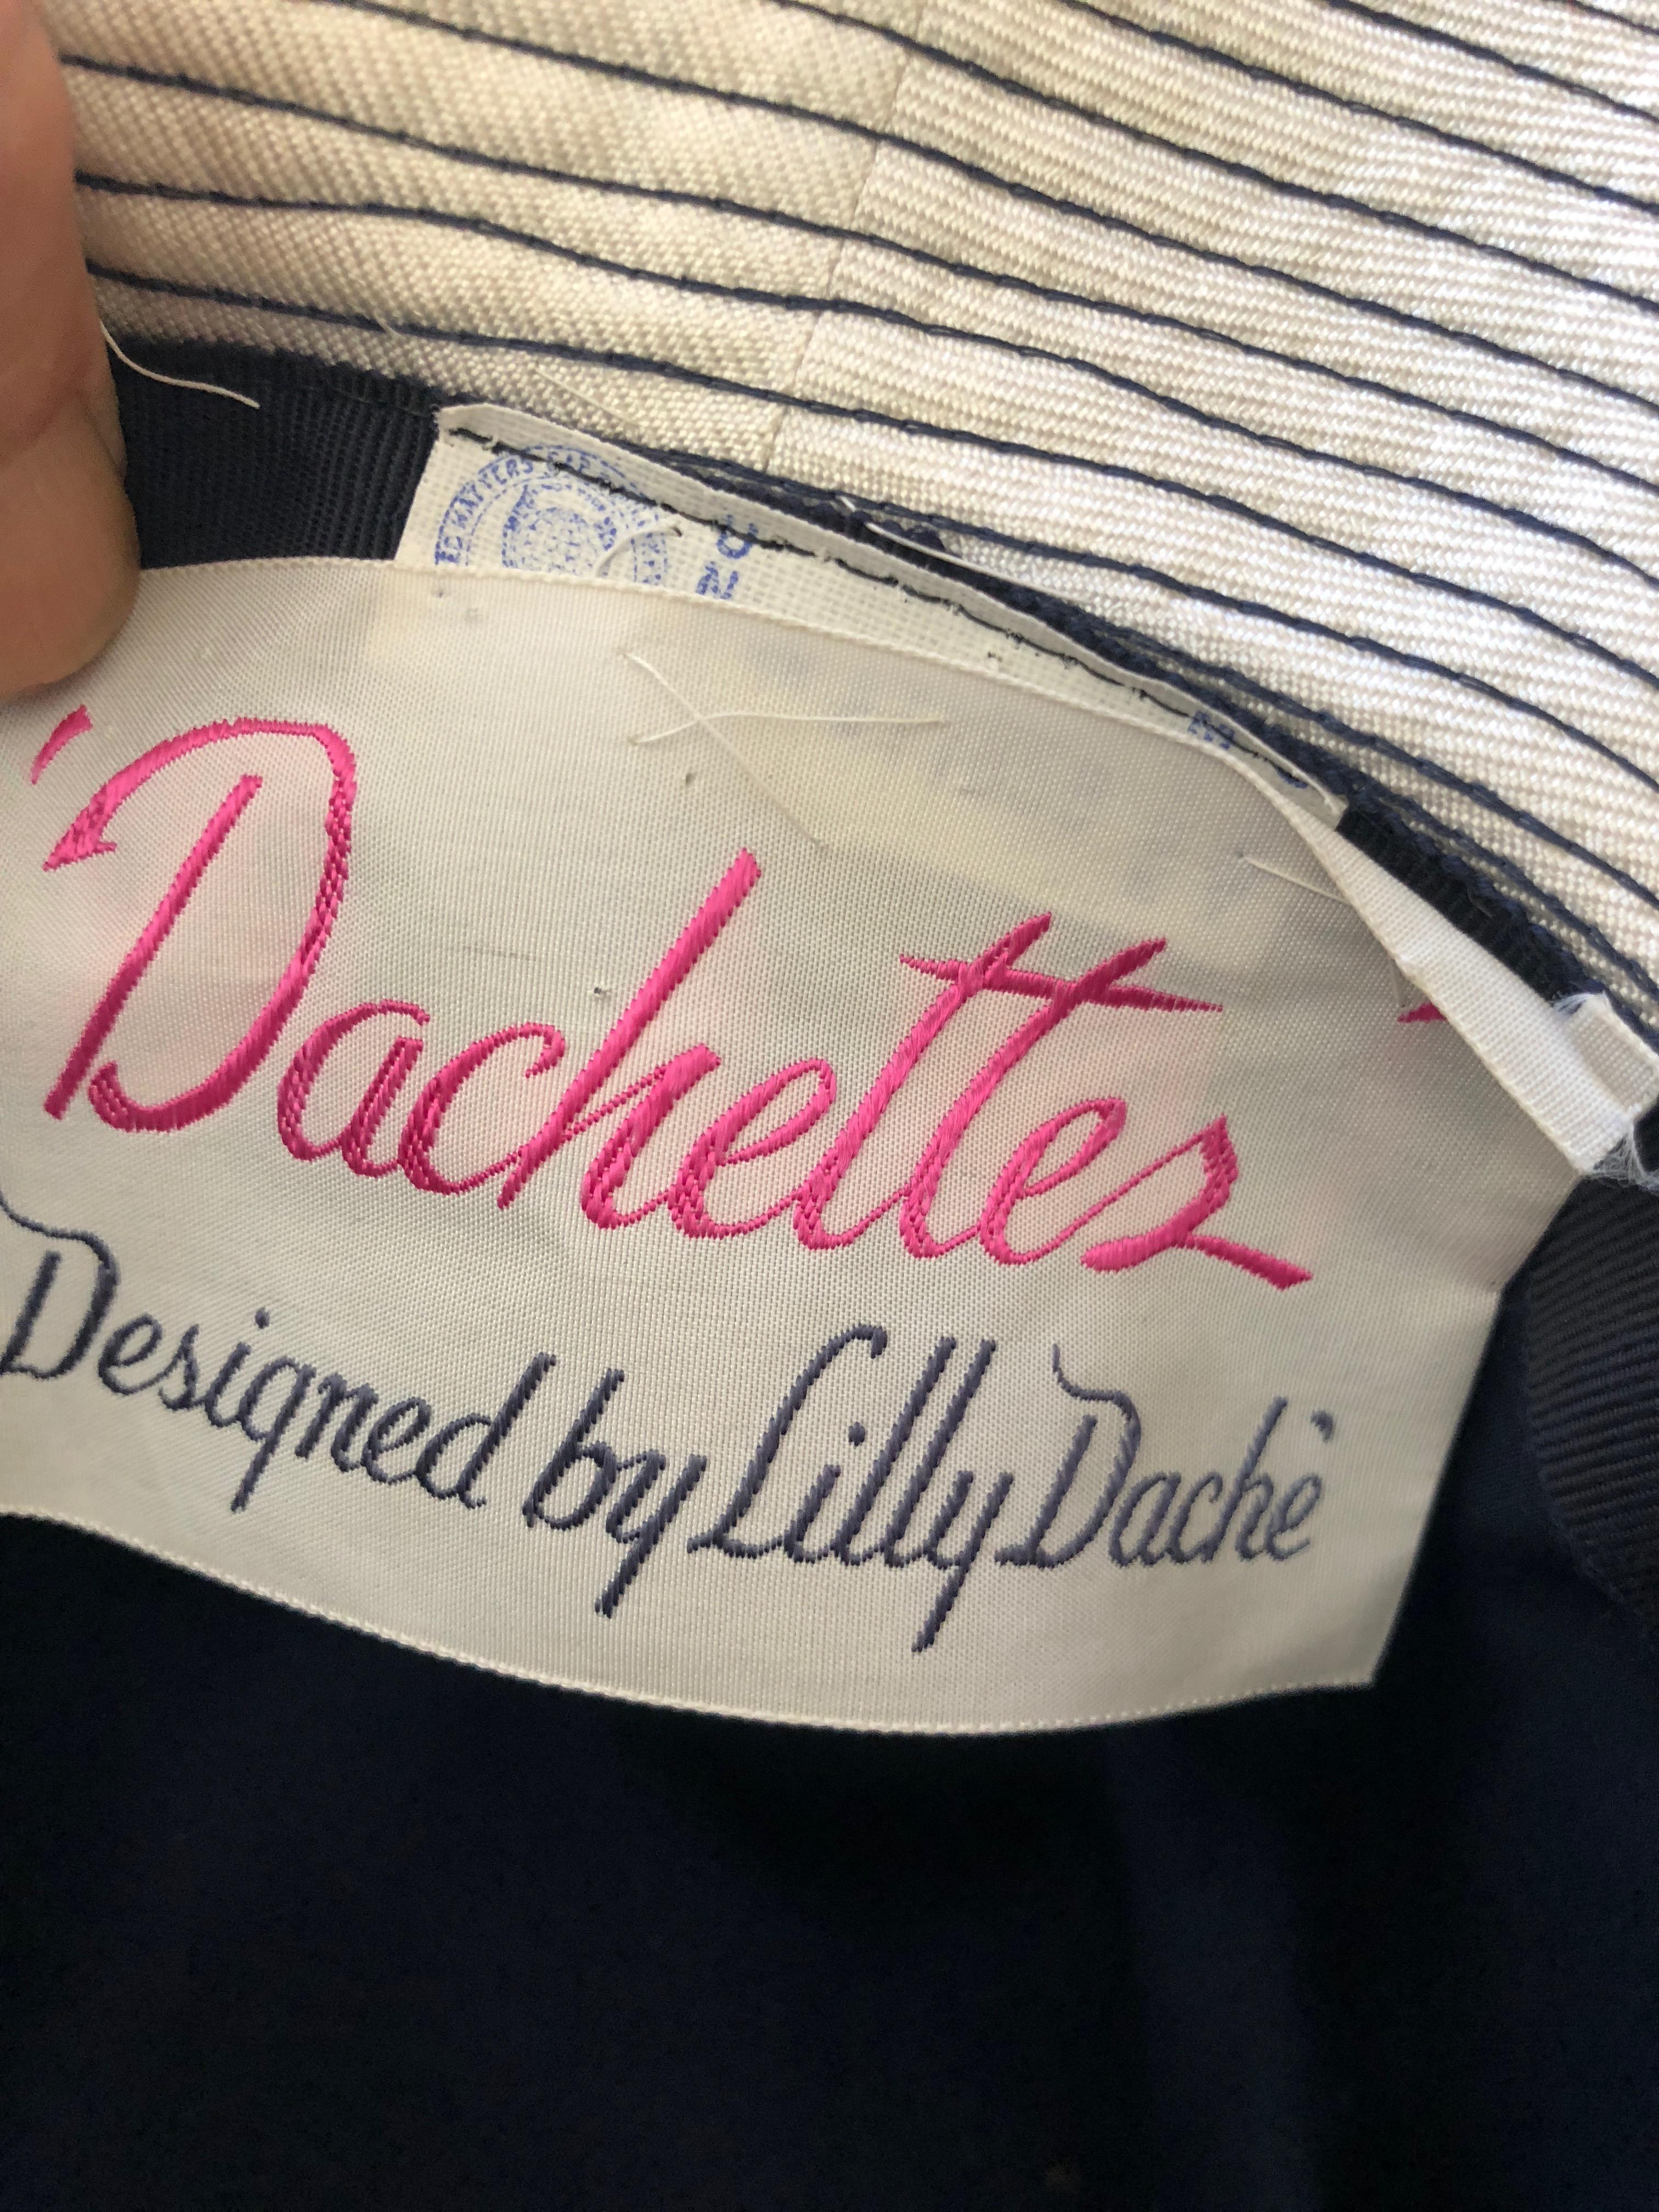 Lilly Daché Dachettes for I. Magnin 1960 Deadstock Navy and Cream Fedora Hat For Sale 2